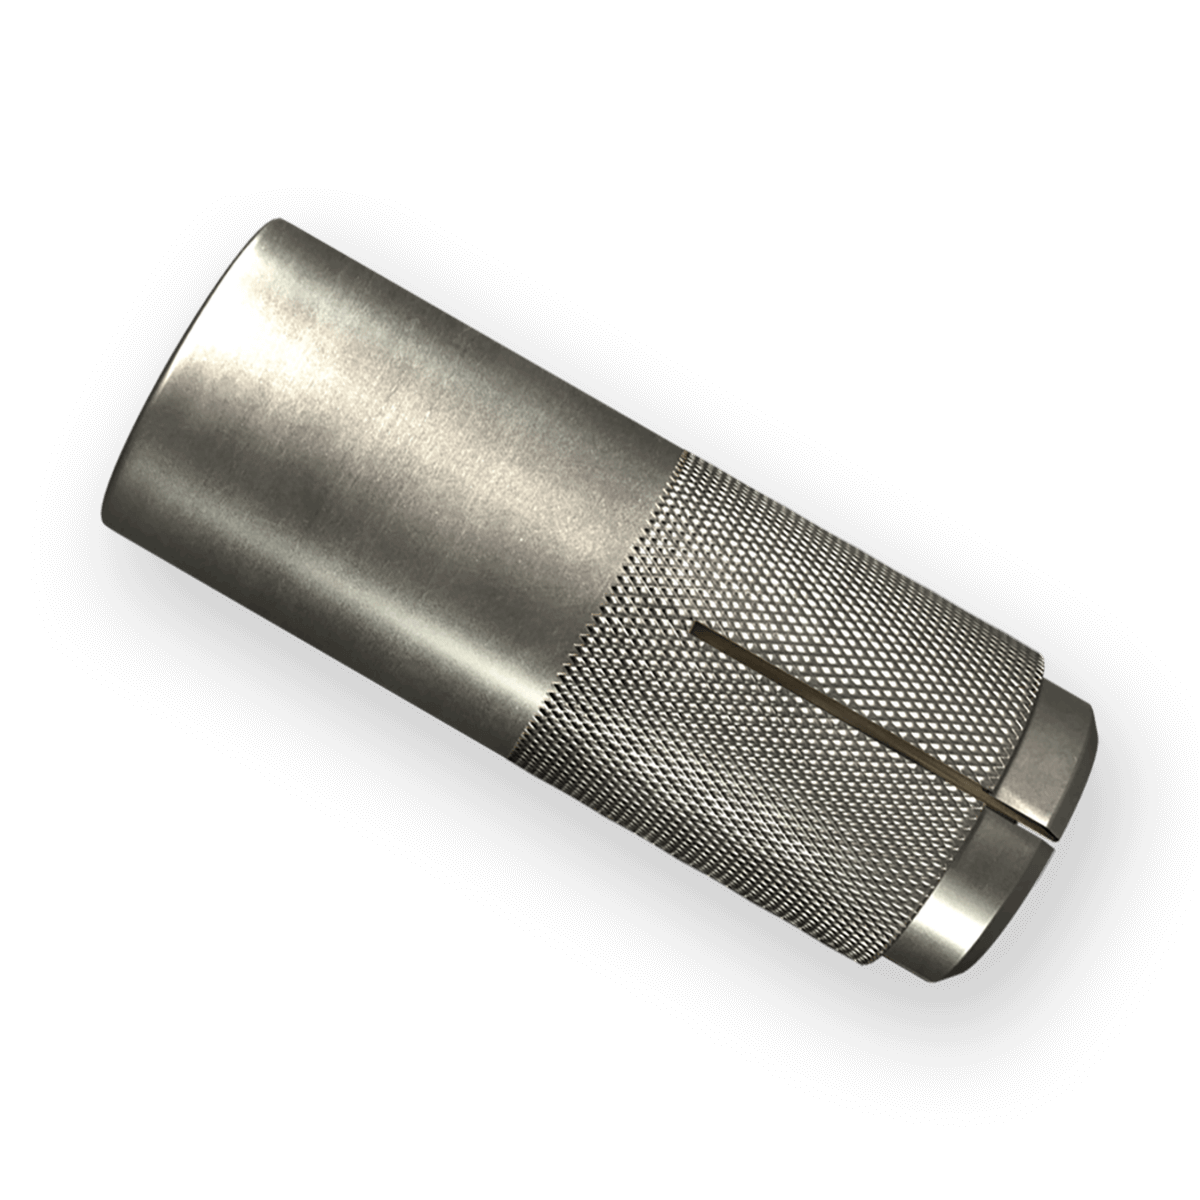 Zinc Plated Finish Meets GSA FFS-325 Group VIII Type 1 Specifications 1 Length 3/8 Diameter Wej-It WD14 Internally Threaded Drop-In Anchor Carbon Steel Pack Of 100 1/4-20 Threads 